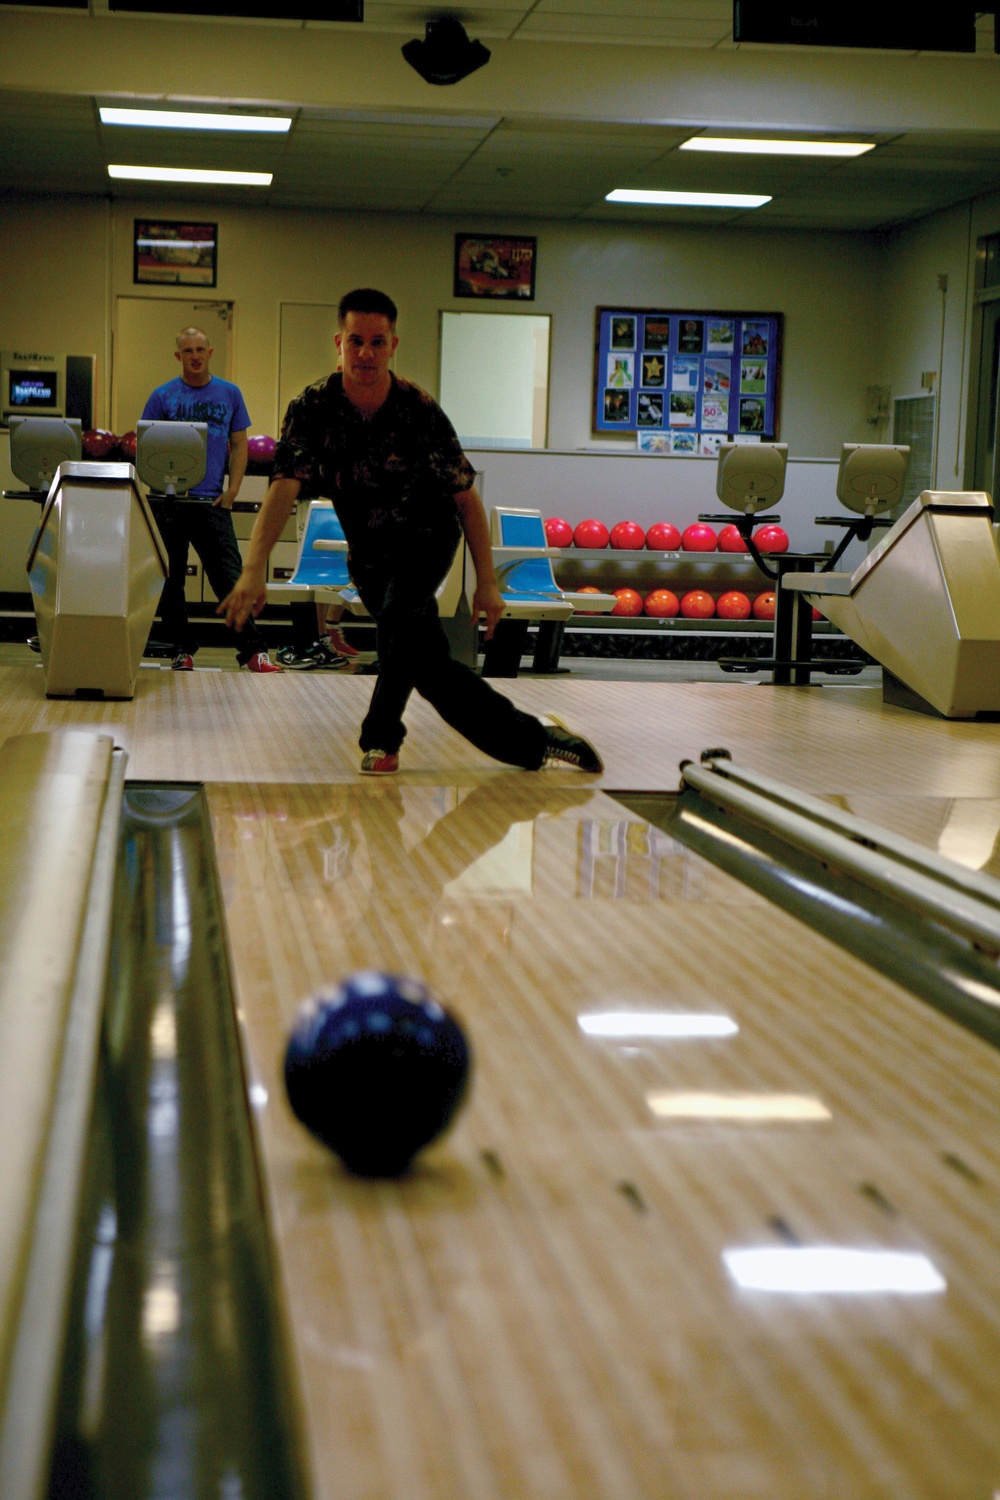 Bowling offers inexpensive, entertaining pastime